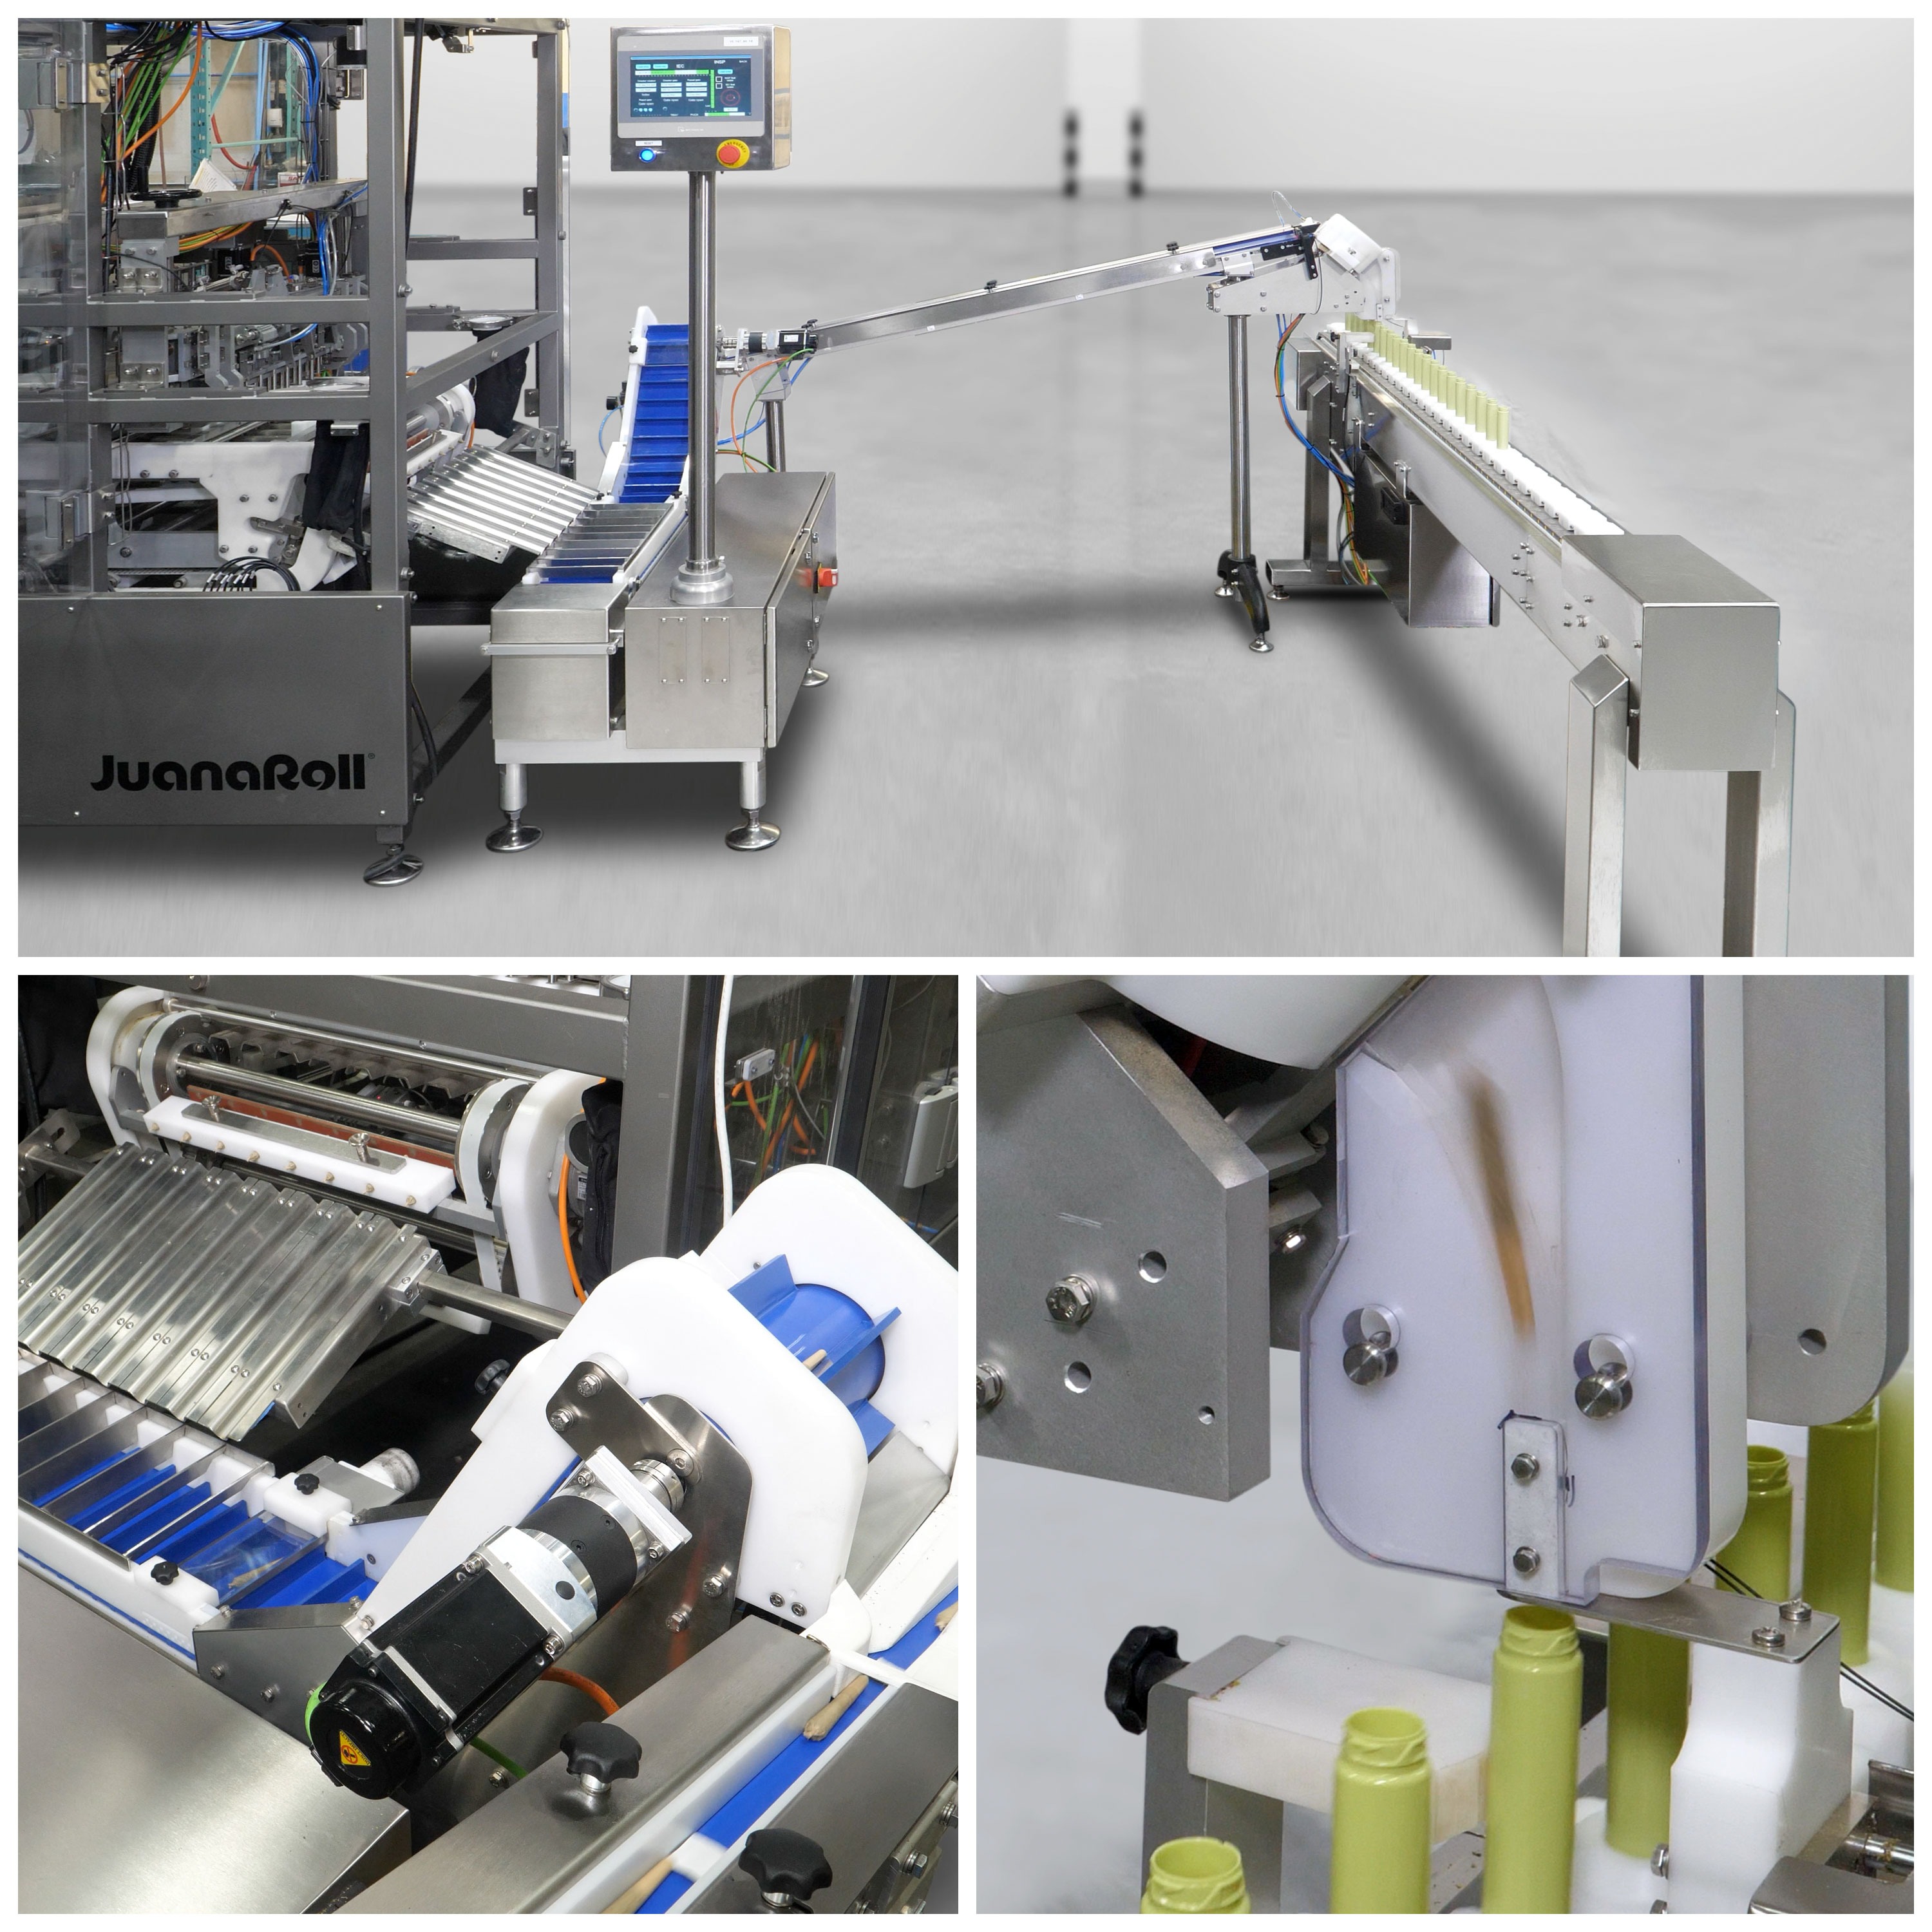 Canapa Unveils Automatic Pre-Roll Tube Loading System for the Cannabis Industry 197